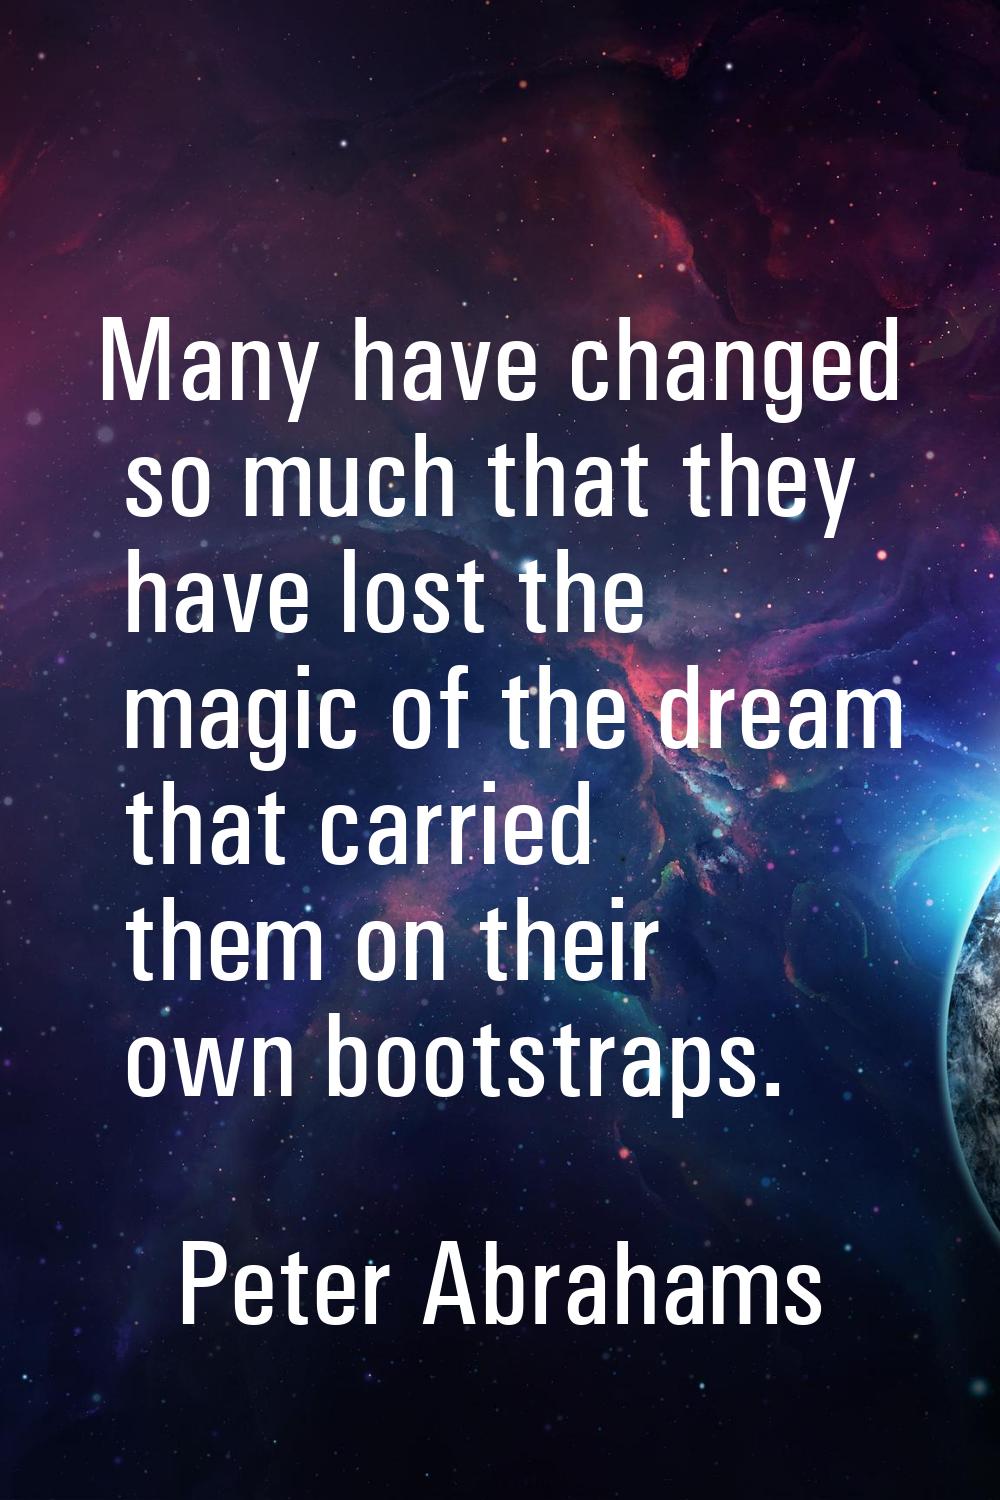 Many have changed so much that they have lost the magic of the dream that carried them on their own